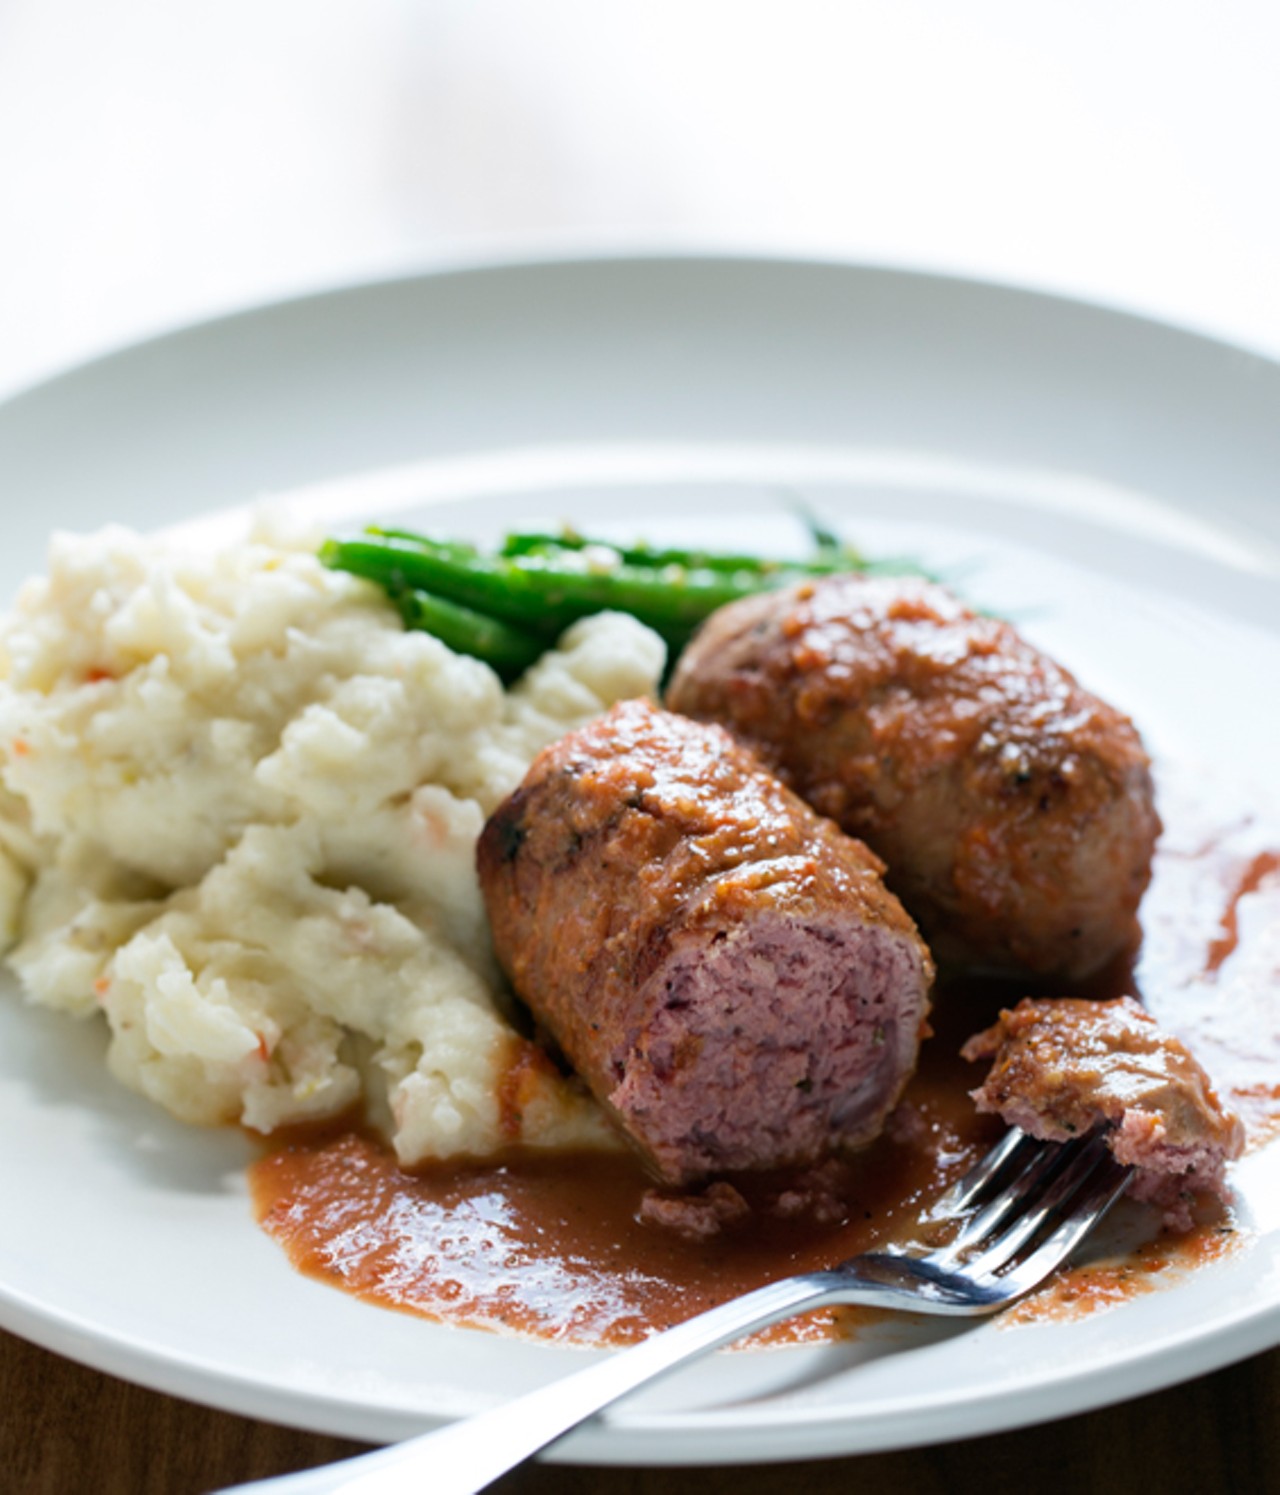 "Blinde Vinken," or "blind finches," is veal stuffed with beef farce in light tomato sauce.